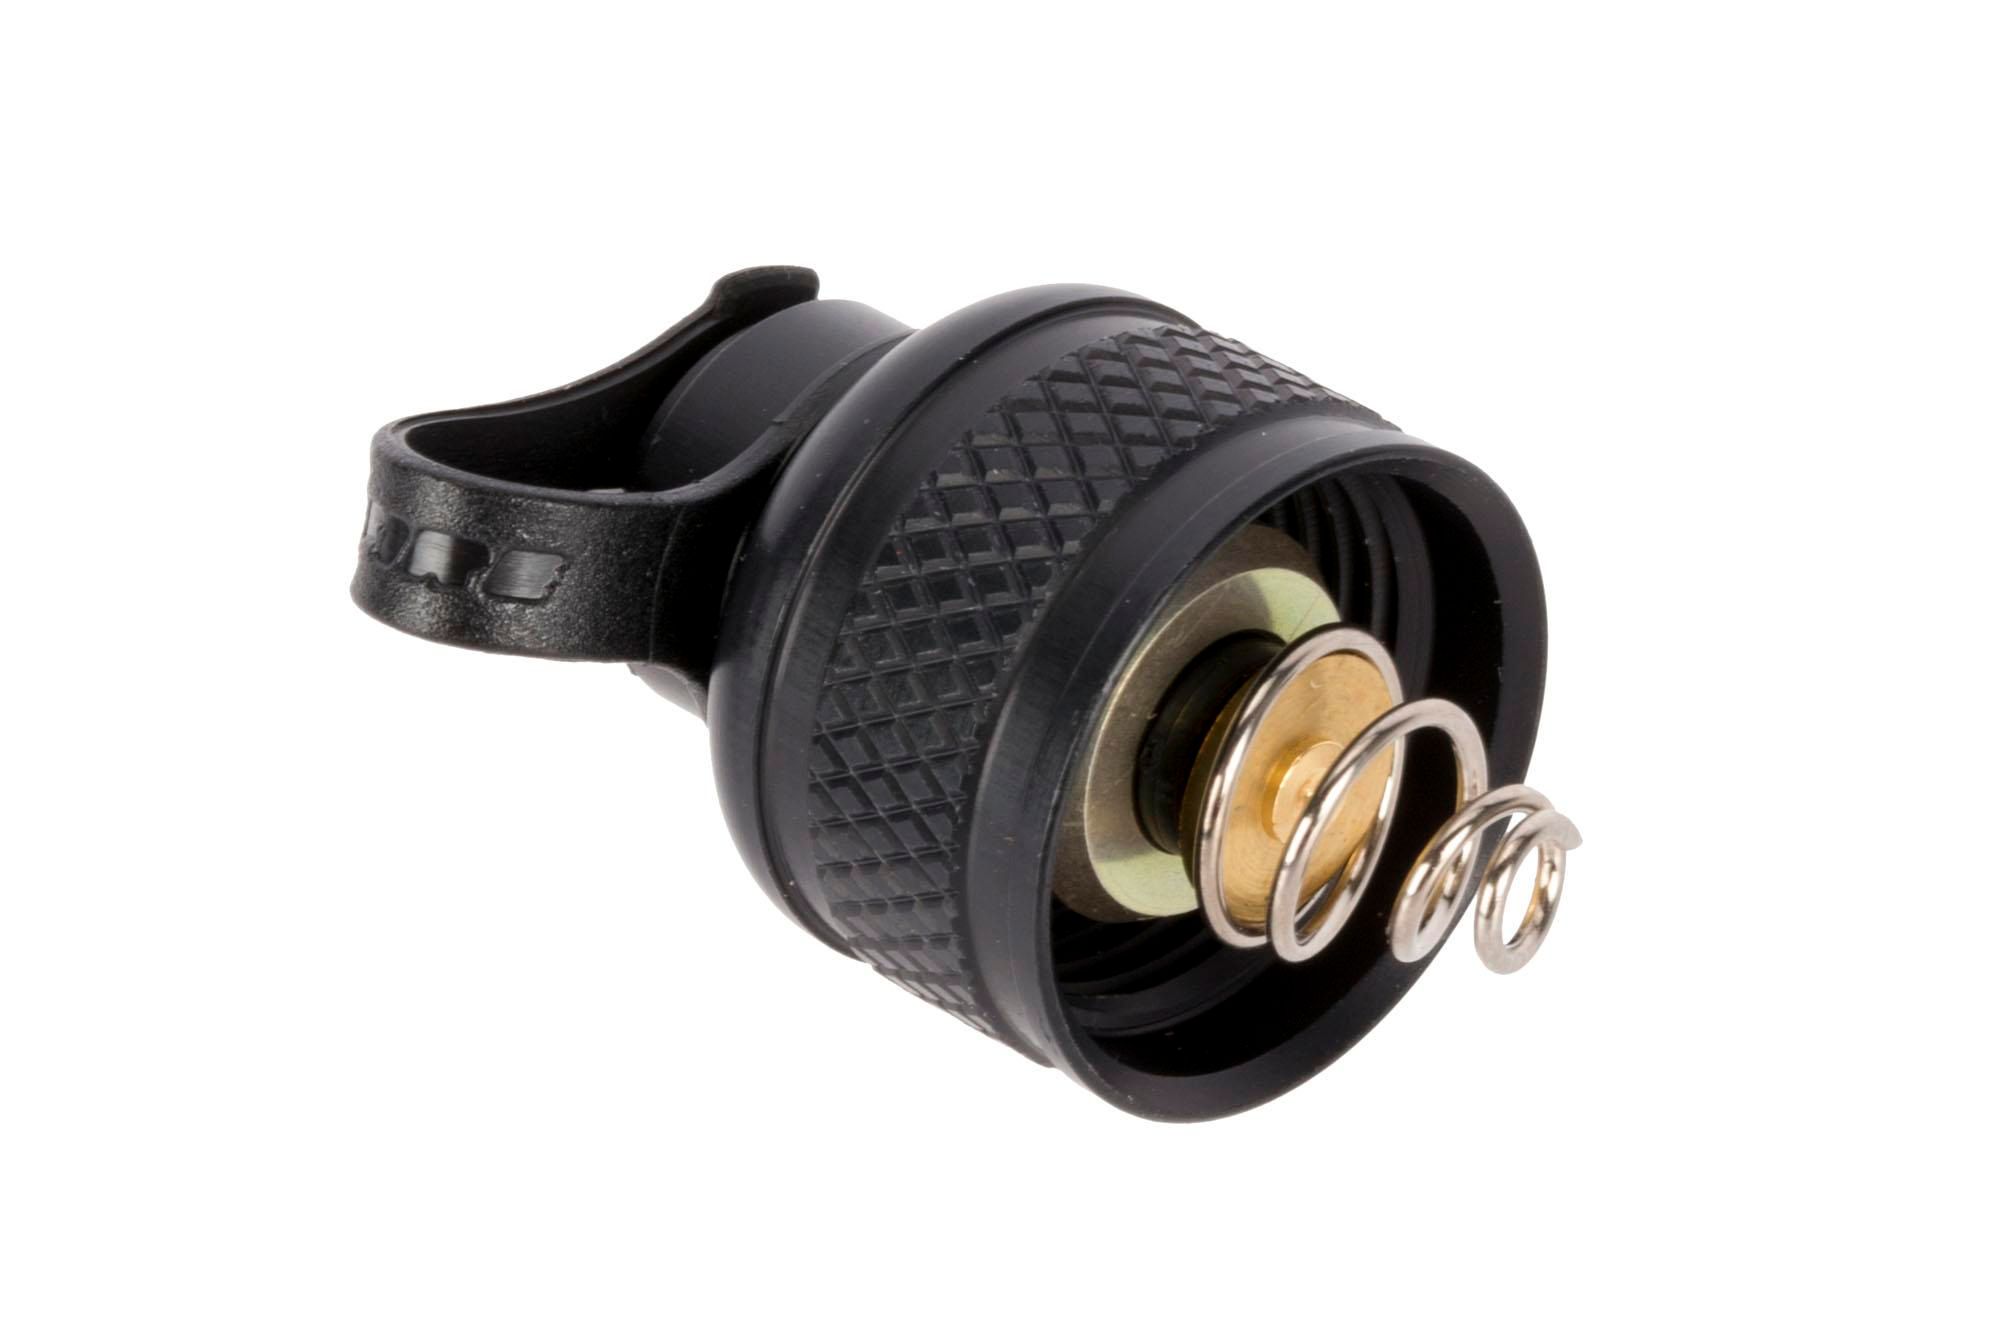 Surefire Replacement Rear Cap without Tape Switch， M6Xx，Bk by SureFire  売り出し新品 アウトドア、釣り、旅行用品